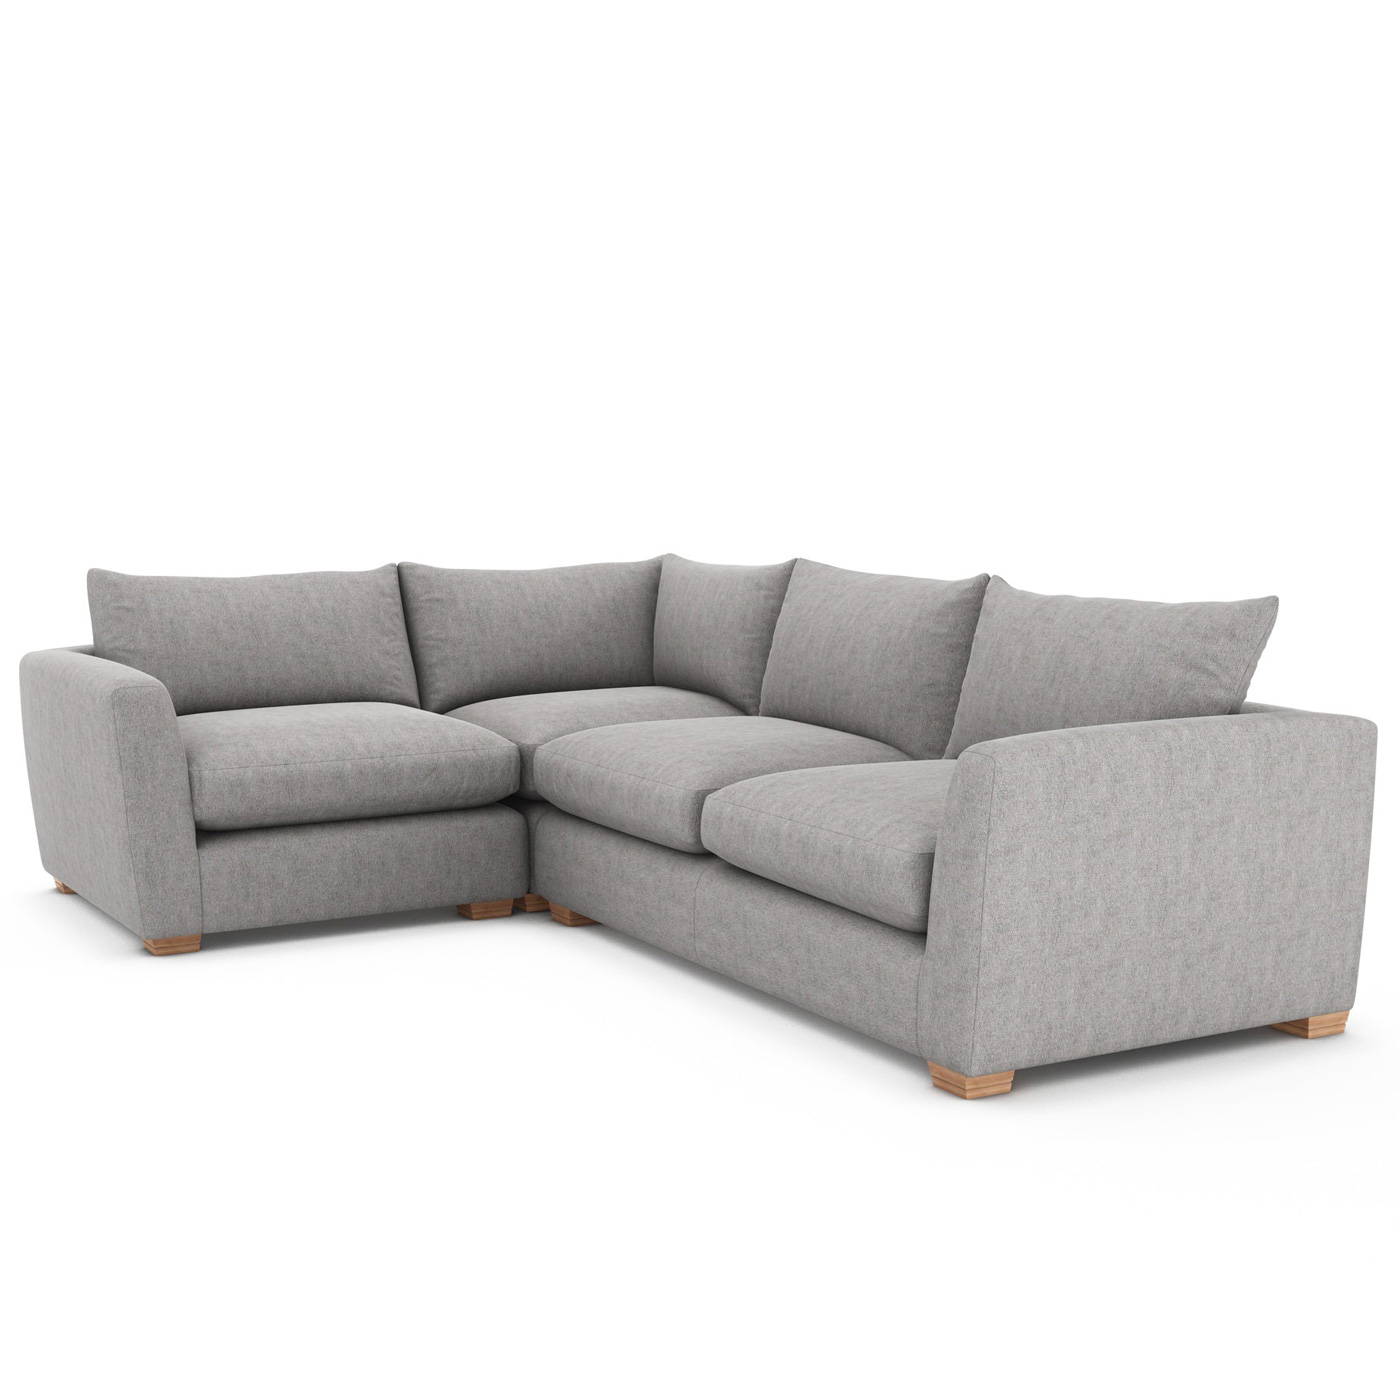 Shop Our Corner Sofas Online - Build Your Own In Store